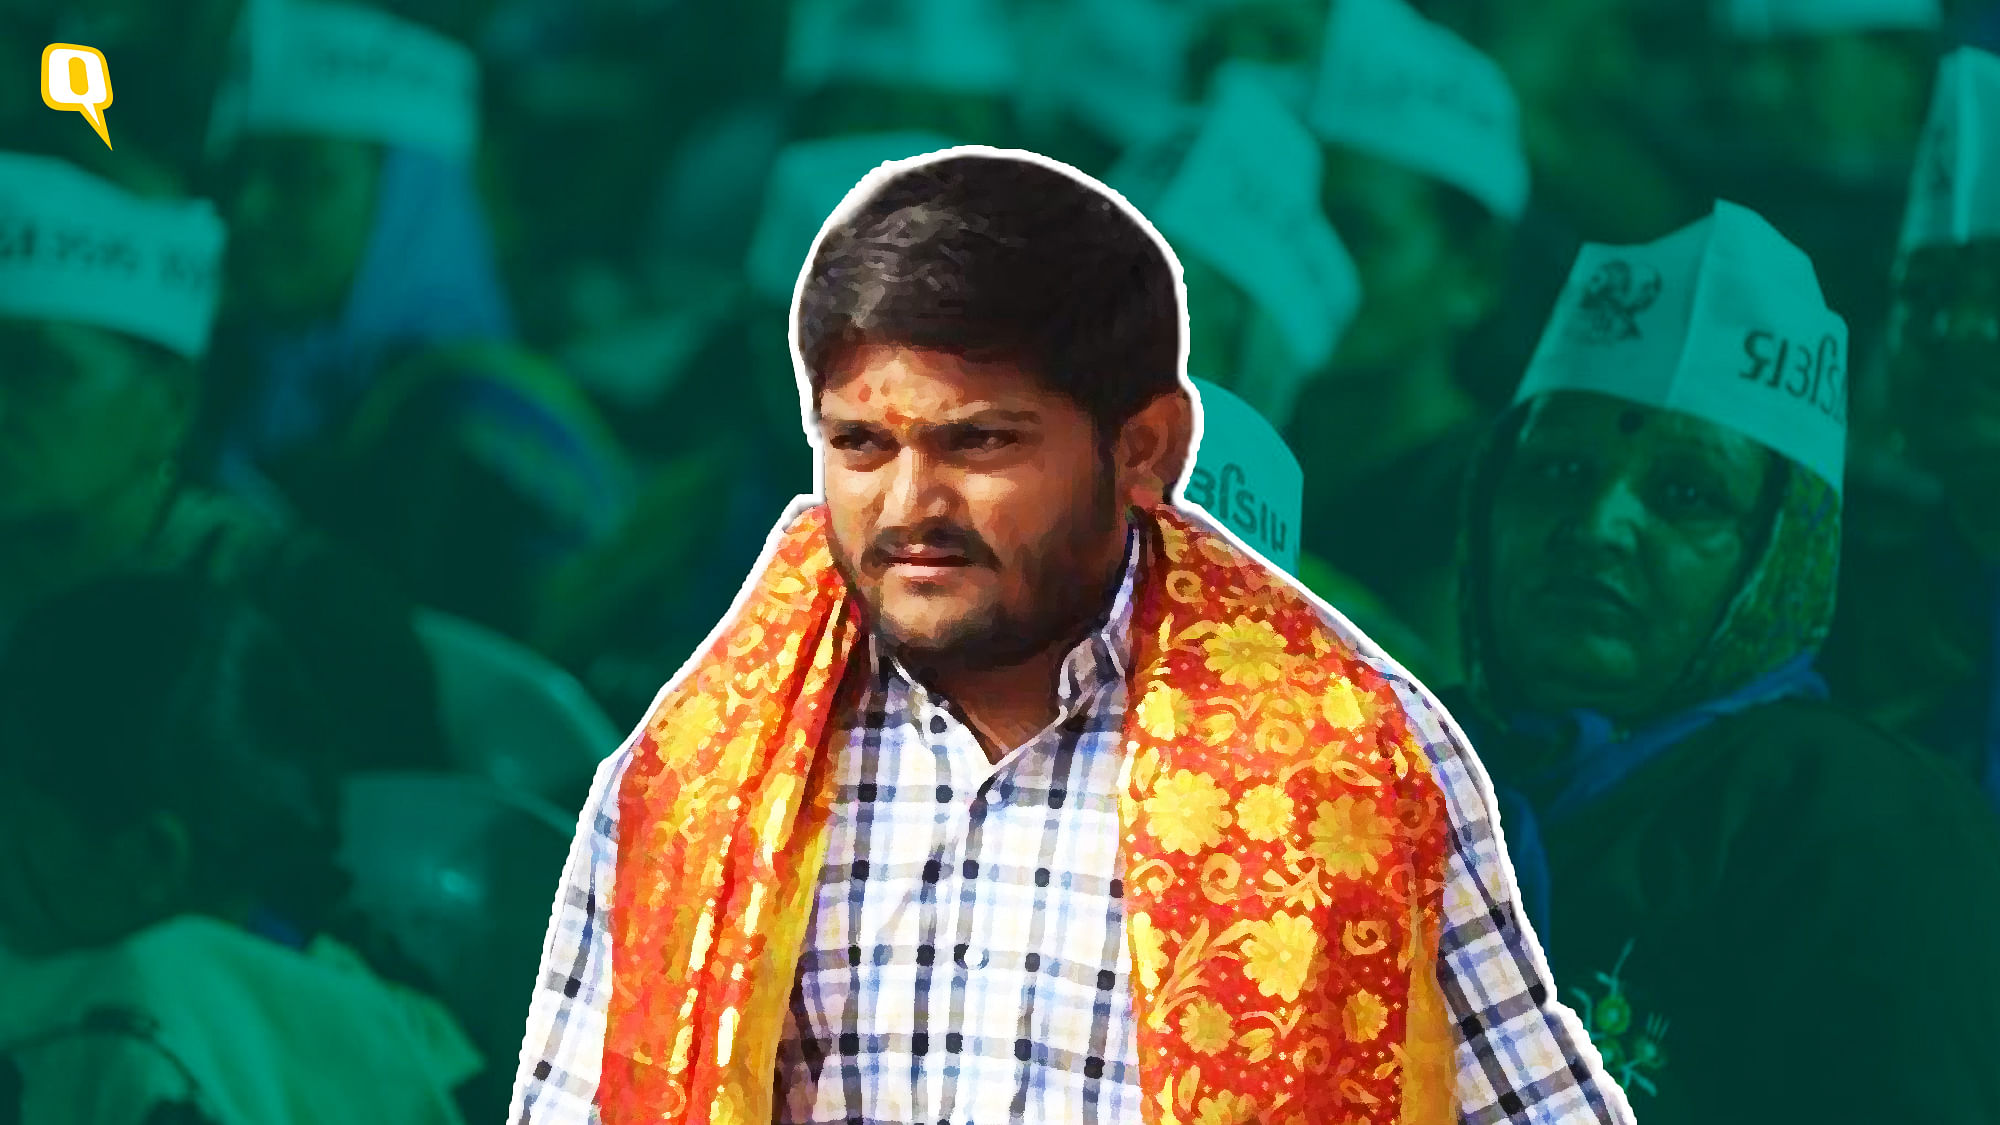 Hardik needs some time and perhaps work harder to become a true leader of the Patidars.